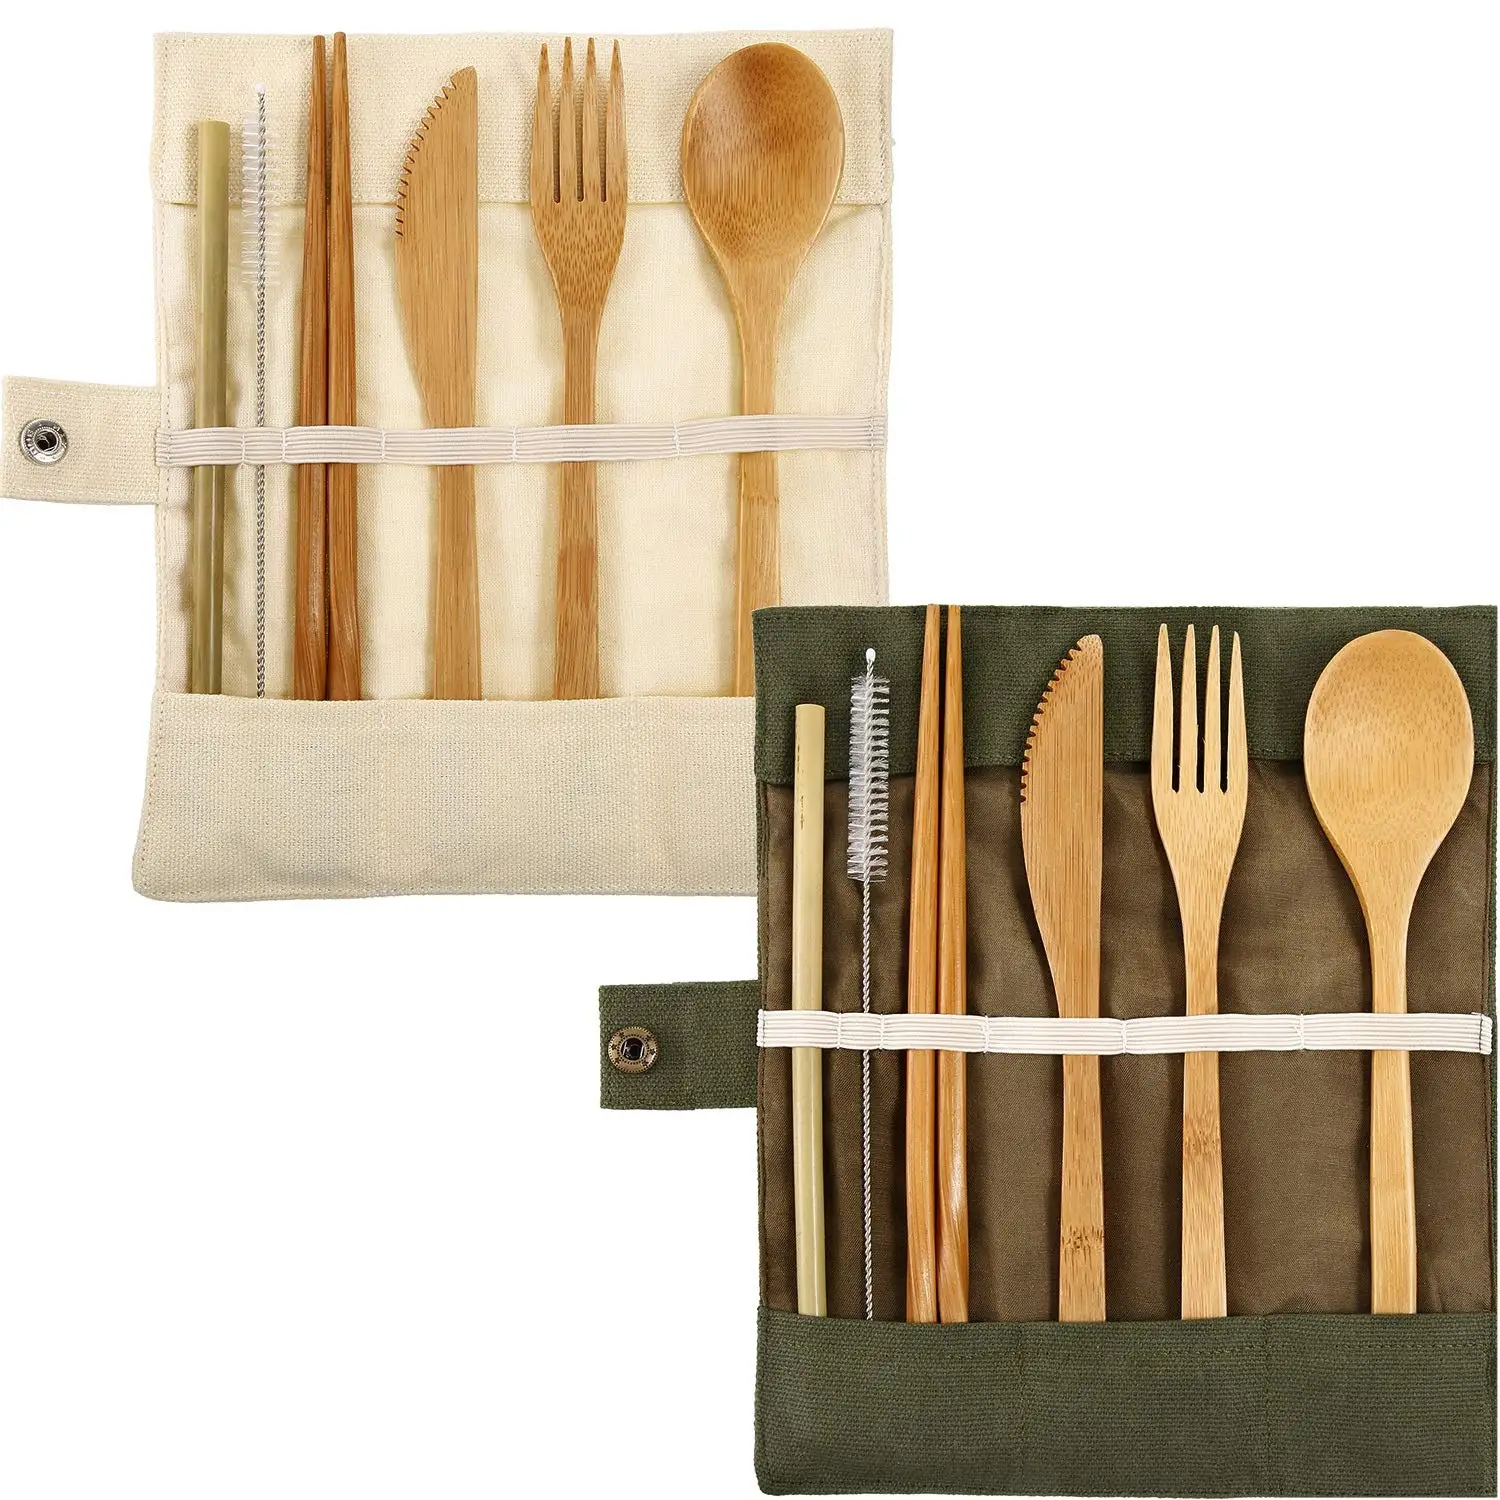 

Good Quality Utensil Travel Reusable Kid Eco-Friendly Camping Organizer Bamboo Cutlery Set With Bag